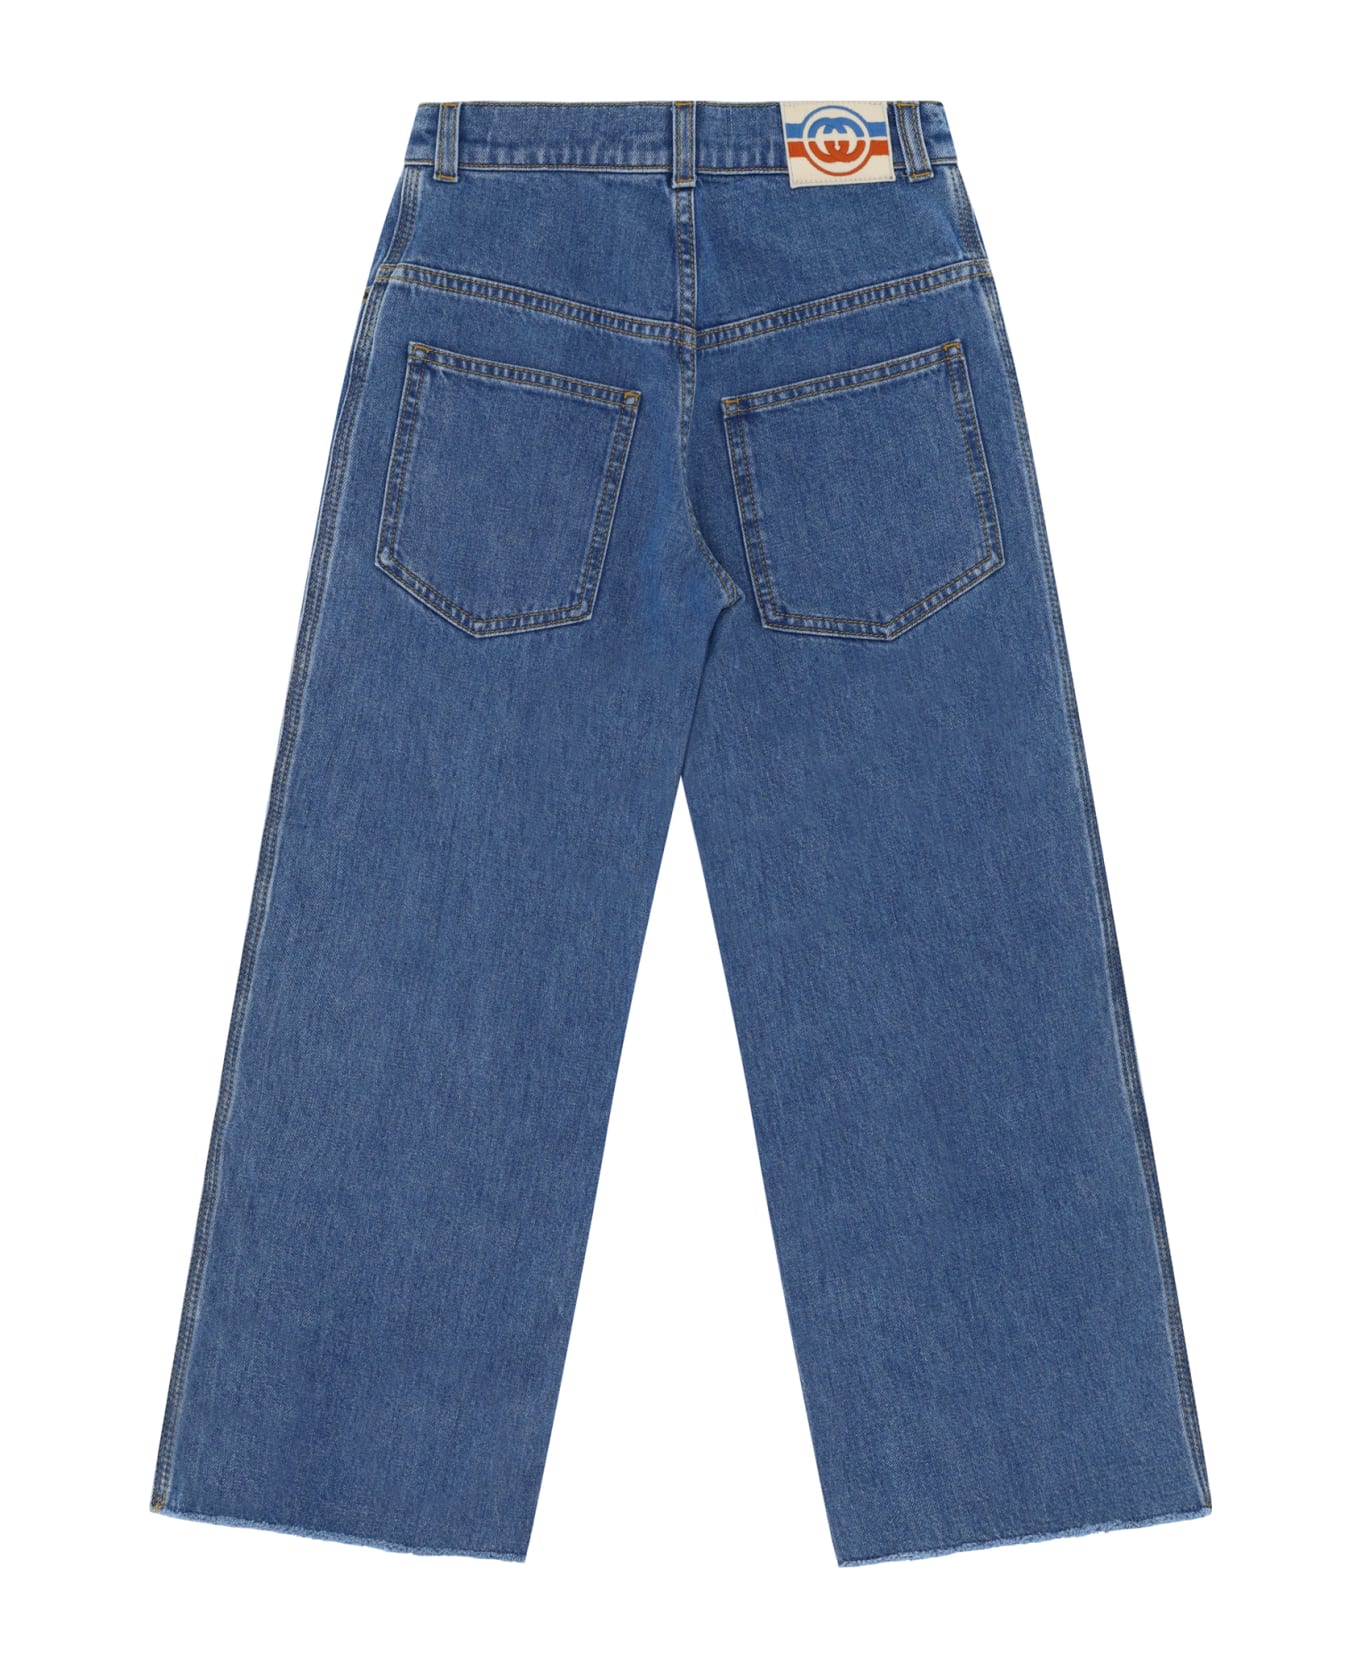 Gucci Jeans For Boy - Blue/mix